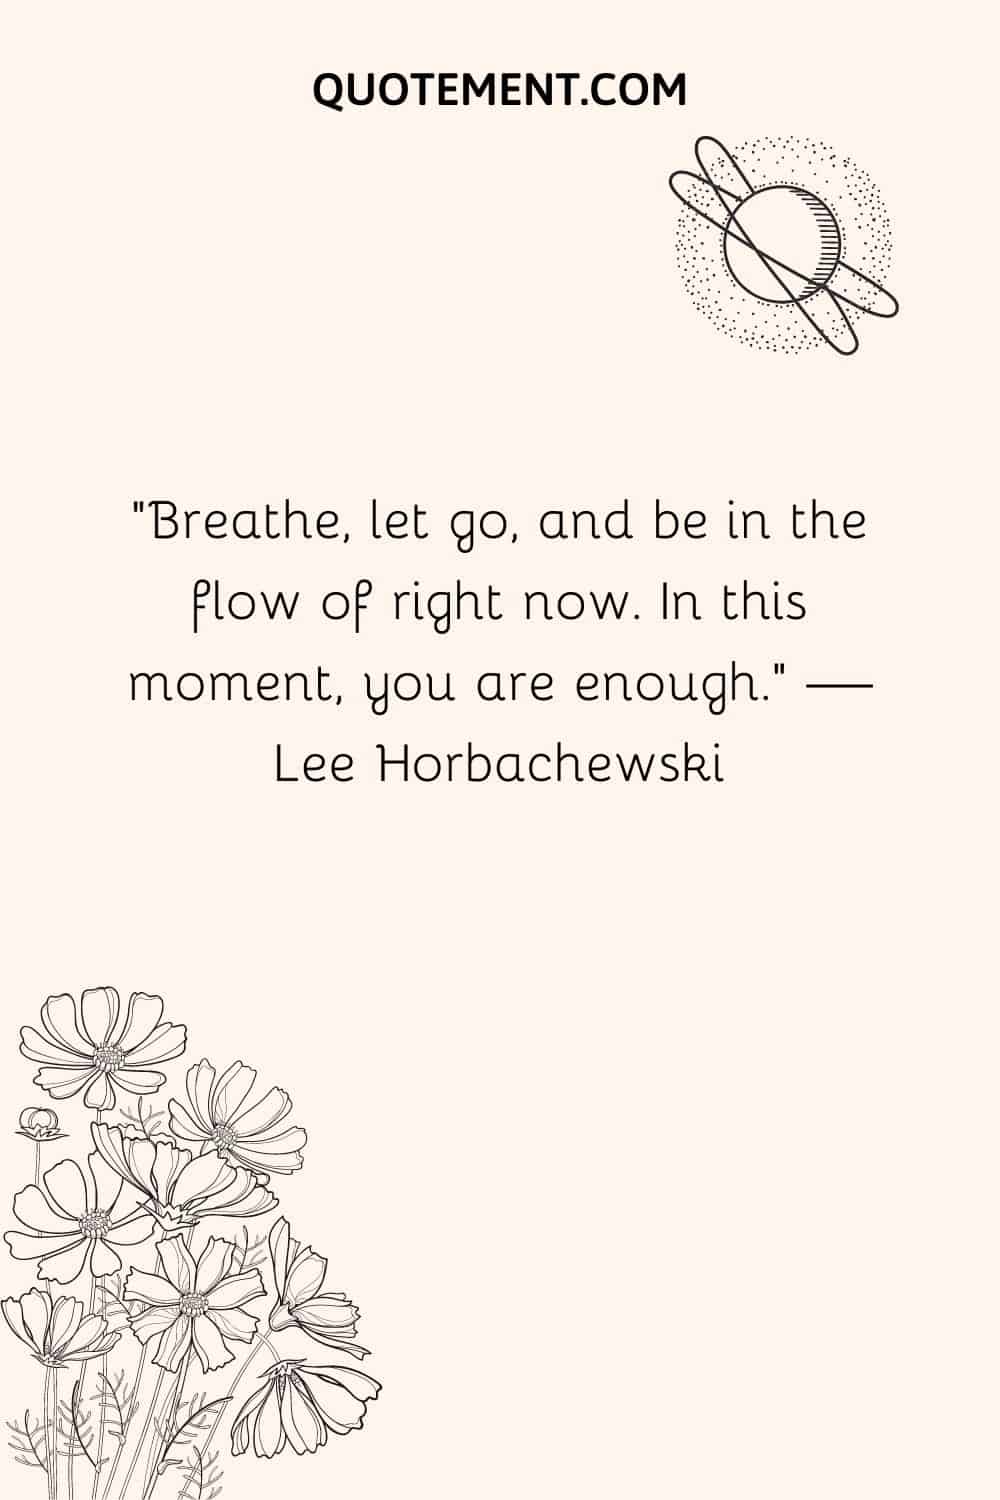 Breathe, let go, and be in the flow of right now. In this moment, you are enough